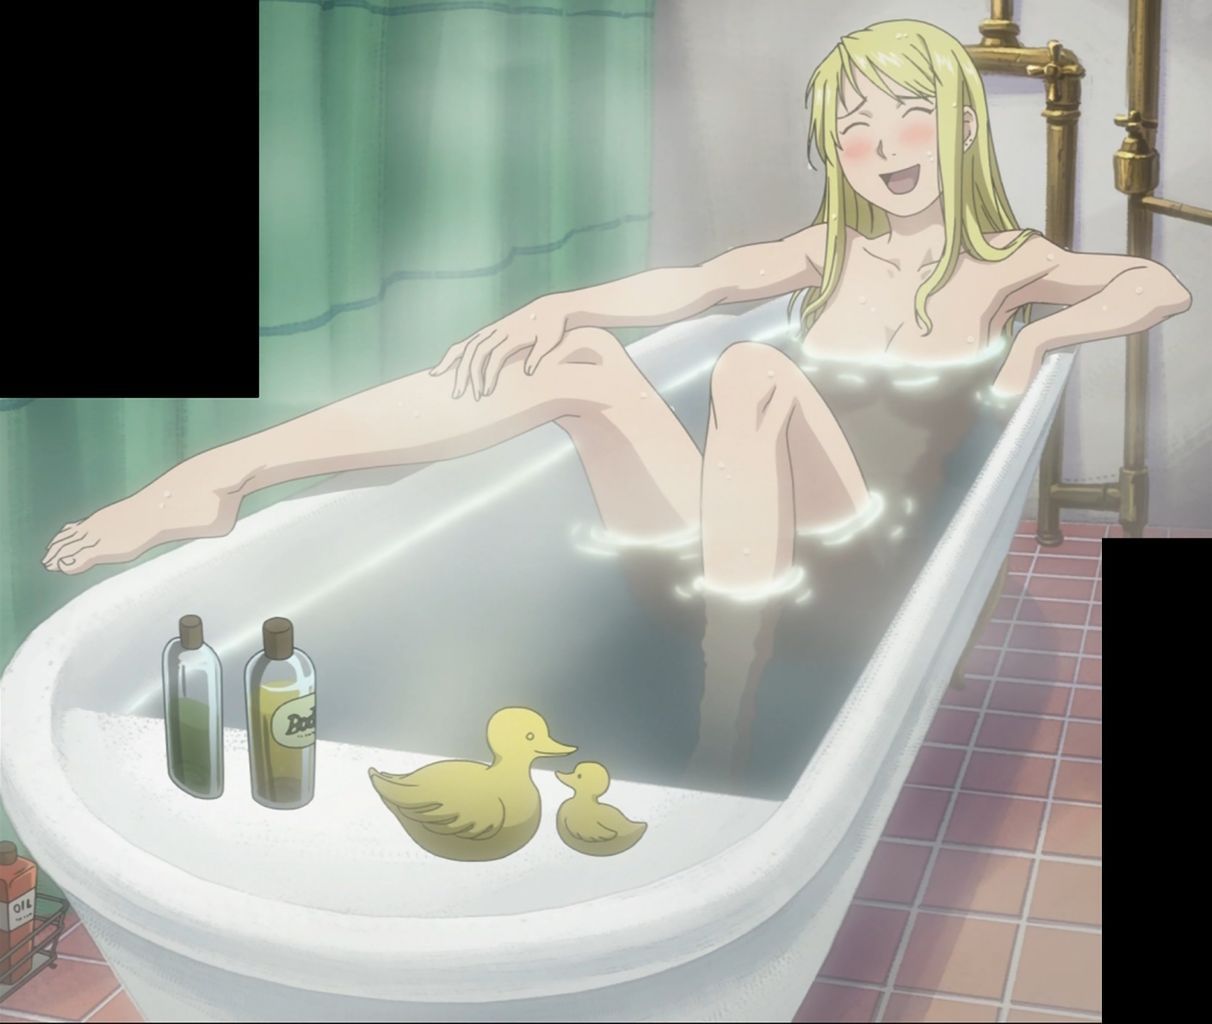 [Anime General] anime girl characters were hot springs / bath bathing siner images / [drawing revision] 46